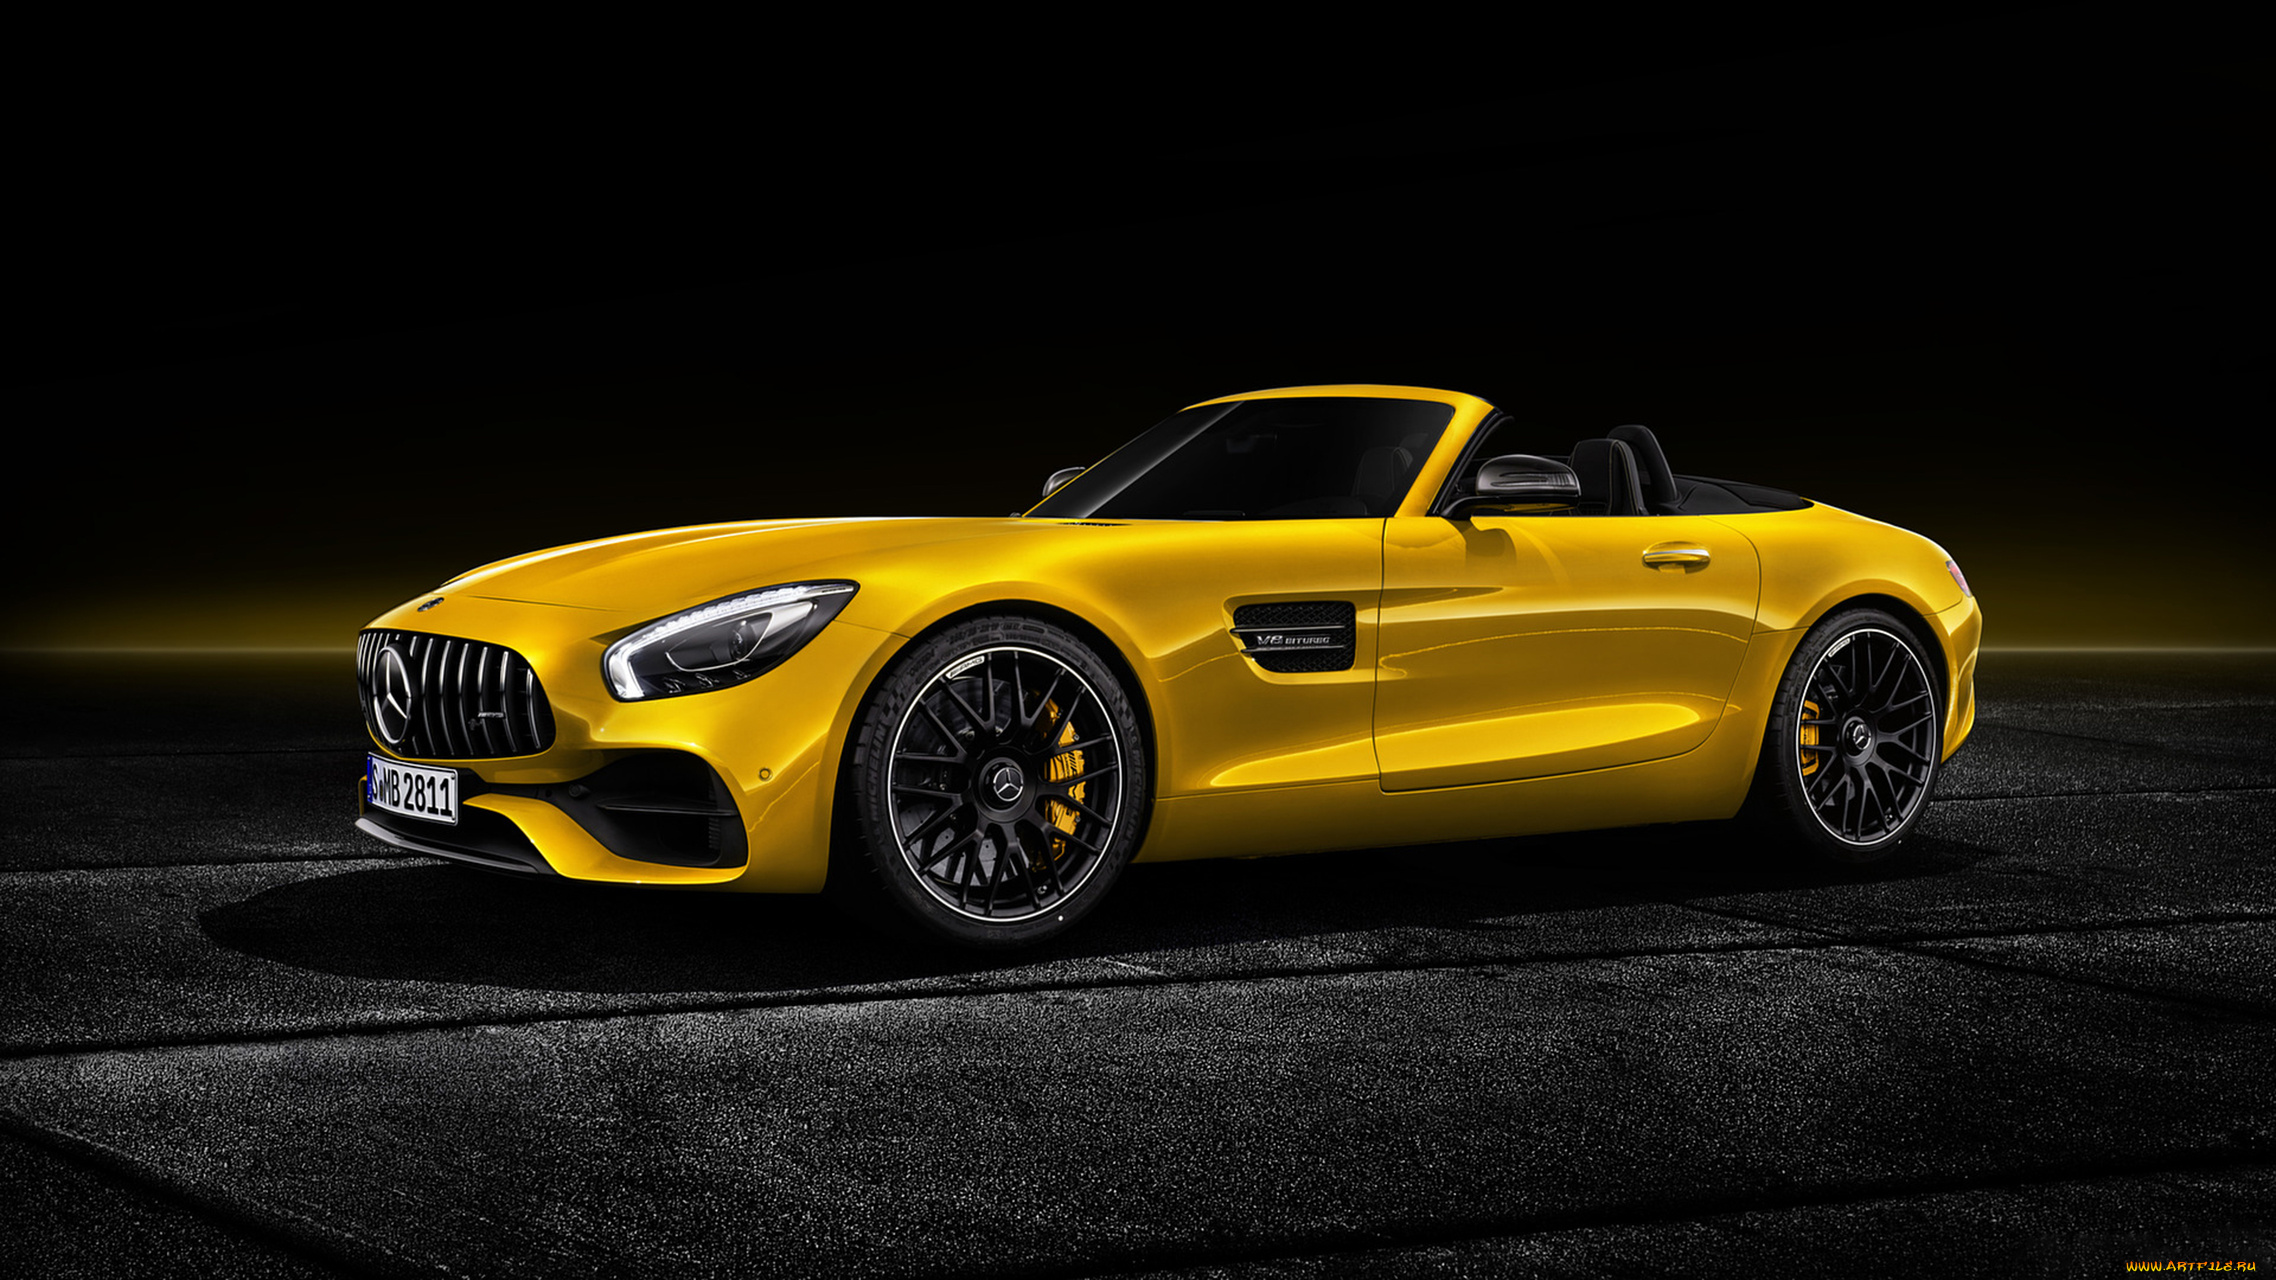 mercedes-benz, amg, gt, s, roadster, 2019, автомобили, mercedes-benz, жёлтый, 2019, s, roadster, gt, amg